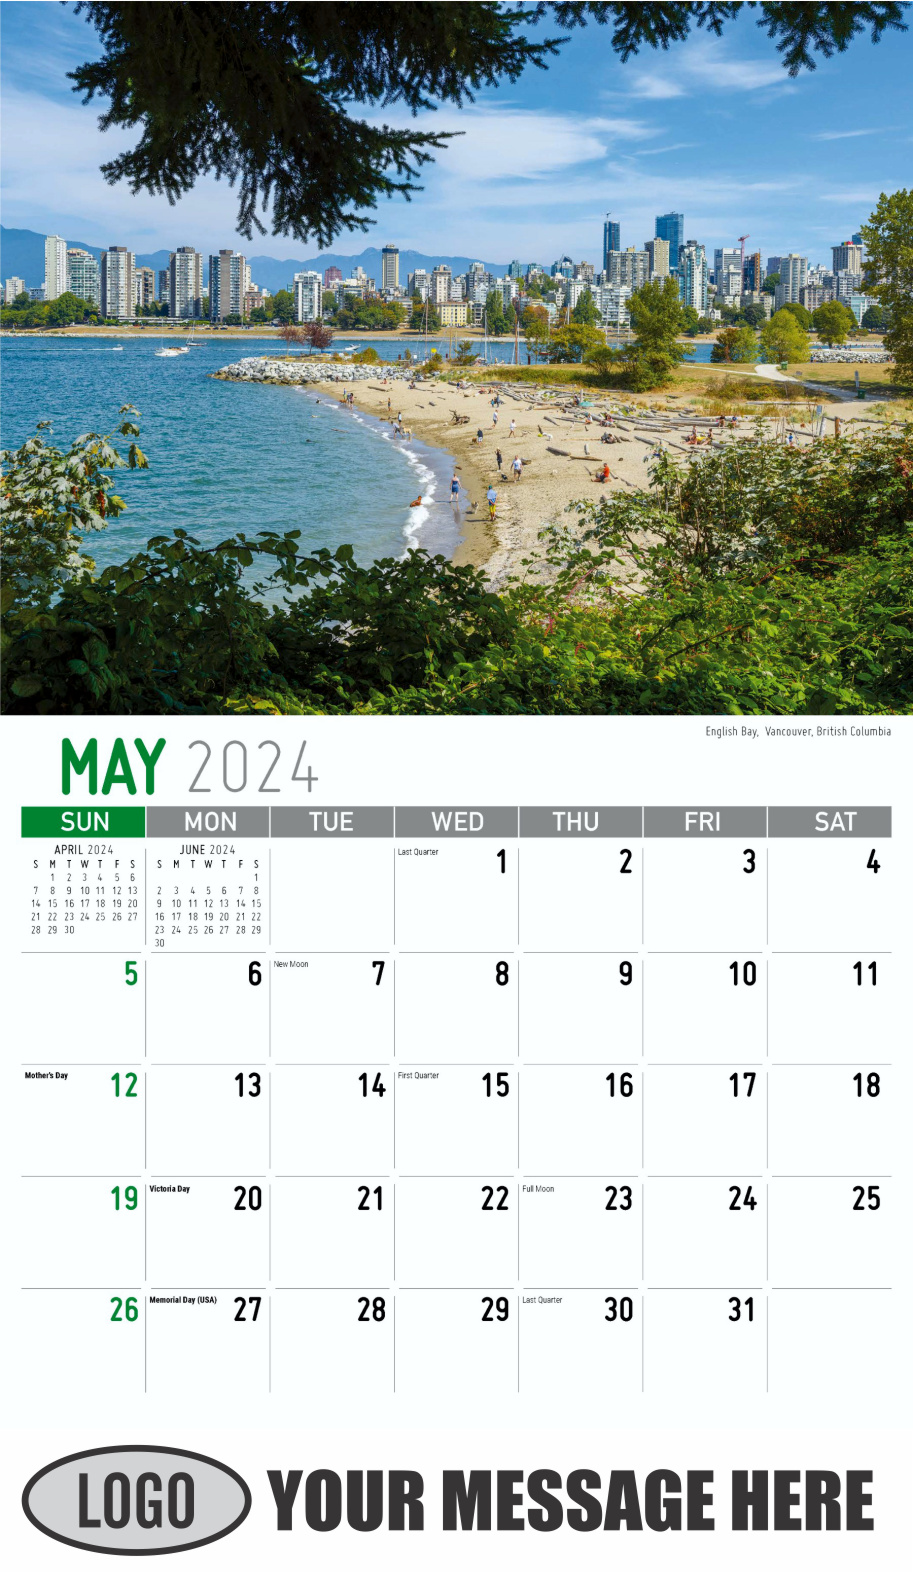 Scenes of Western Canada 2024 Business Promotional Wall Calendar - May